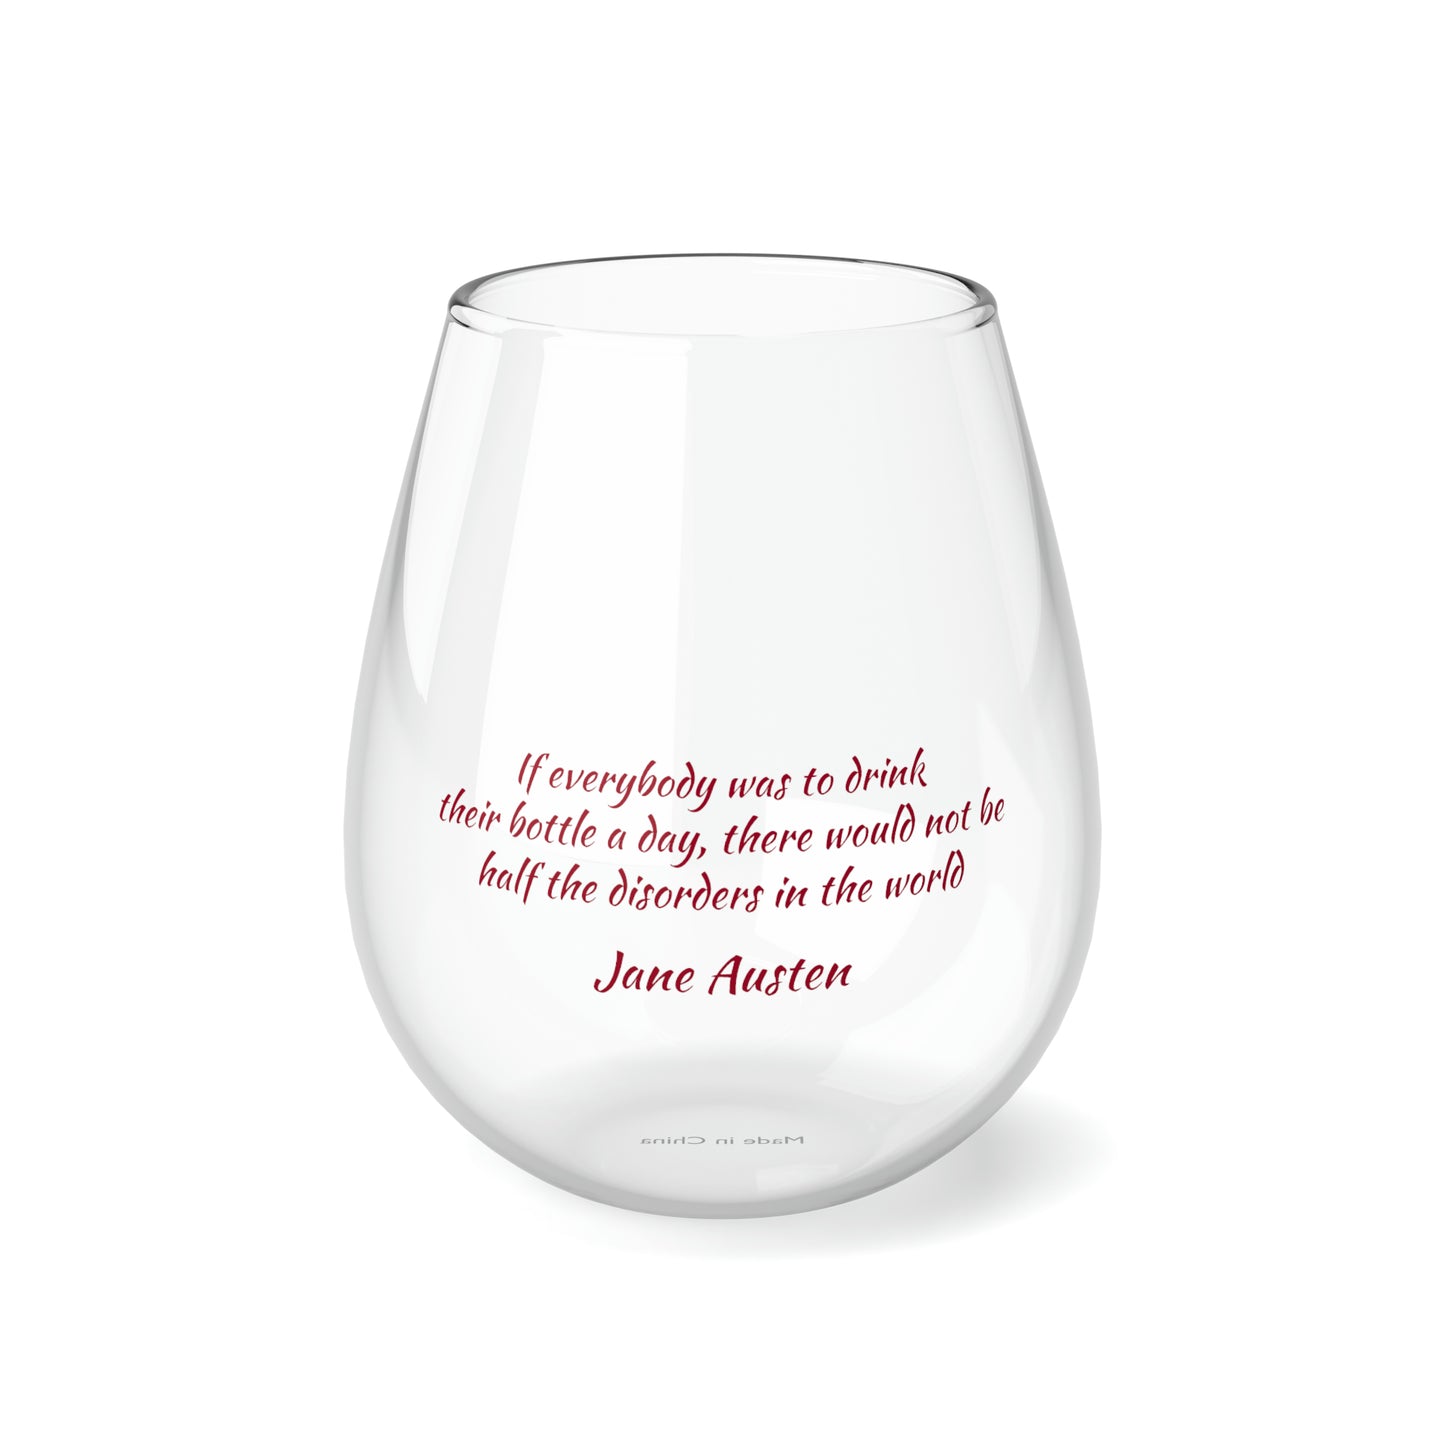 Bottle a Day Wine Glass